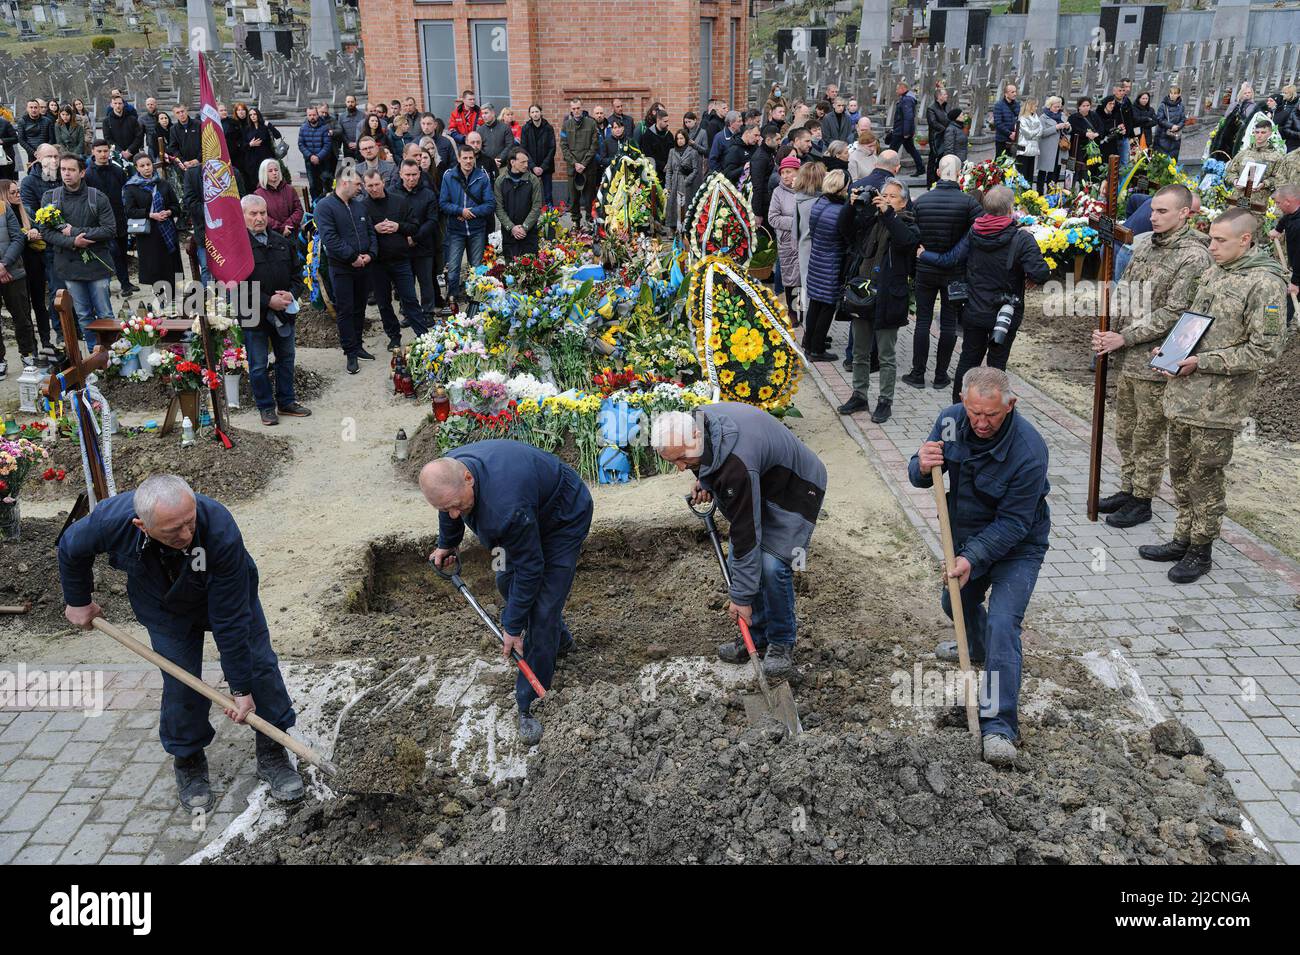 Lviv, Ukraine. 31st Mar, 2022. People seen covering the grave during the burial. Funeral ceremony of 3 Ukrainian soldiers Kozachenko Andriy, Sarkisyan Ihor, Oliynyk Yuriy killed by Russian forces amid the Russian invasion in Lviv. (Photo by Mykola Tys/SOPA Images/Sipa USA) Credit: Sipa USA/Alamy Live News Stock Photo